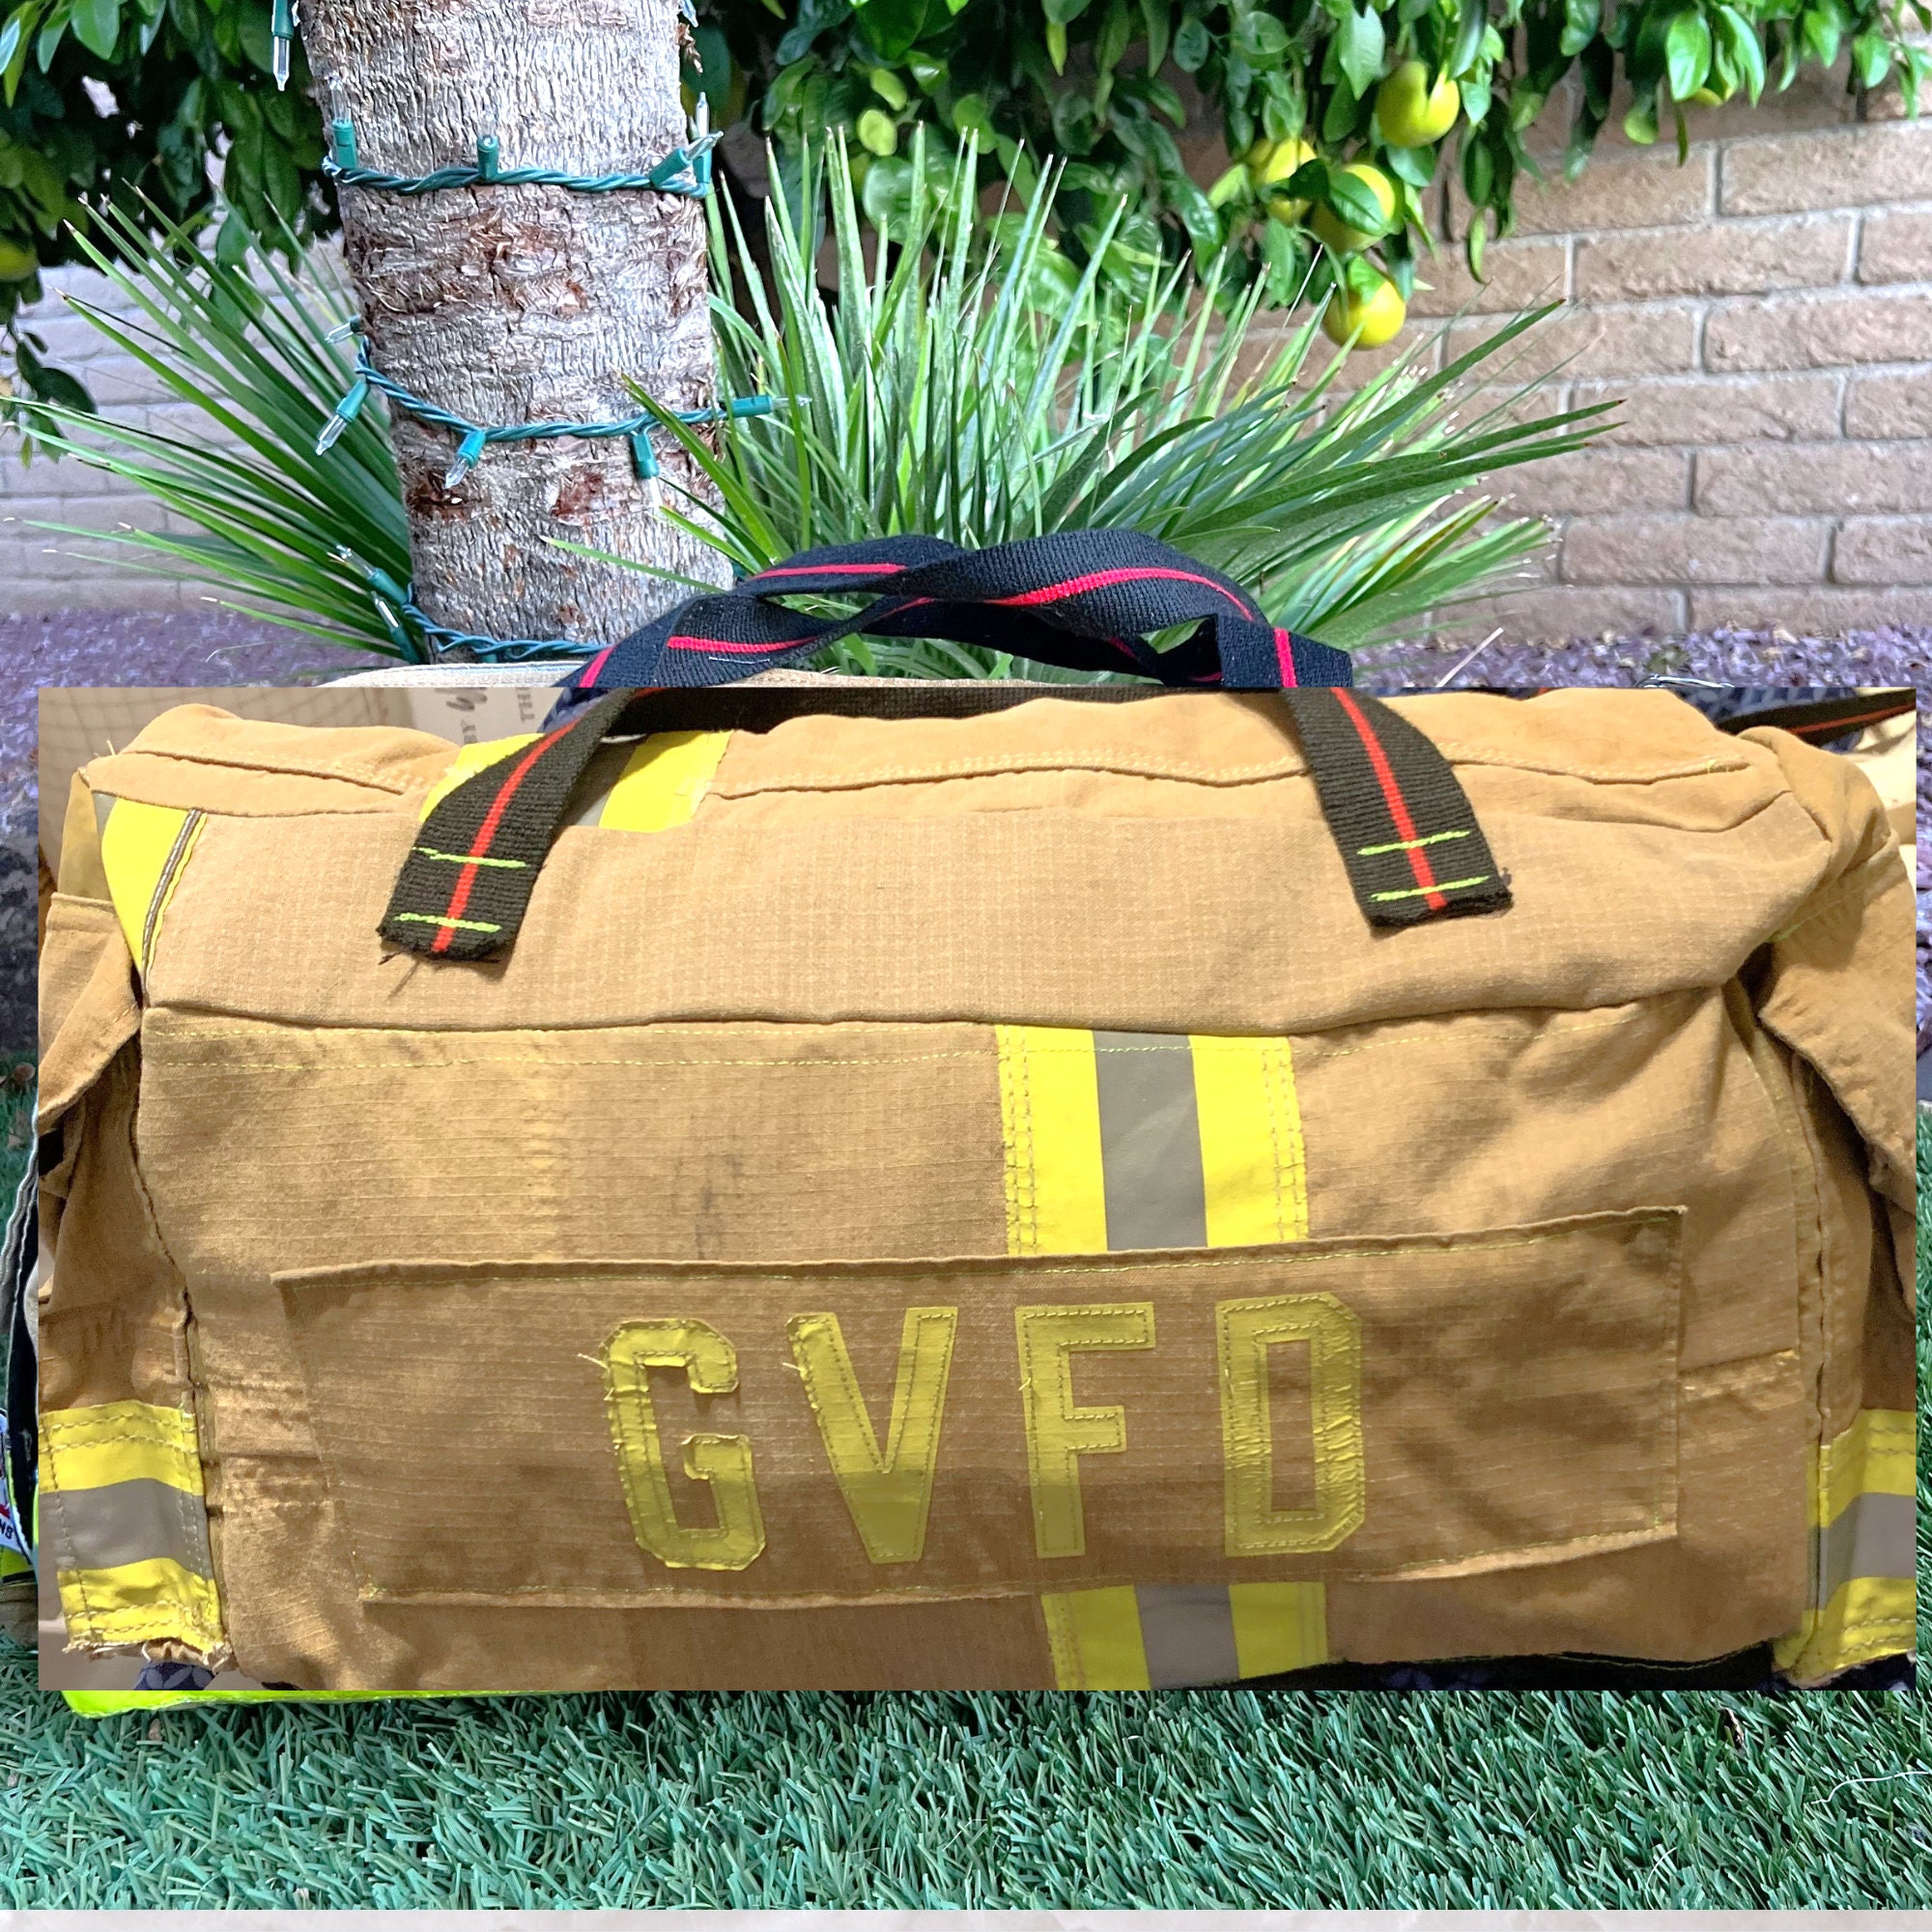 Recycled Turnout Gear Gift a Thoughtful and Meaningful Present for  Firefighters Fire Gear Duffel Bag a Stylish and Functional 